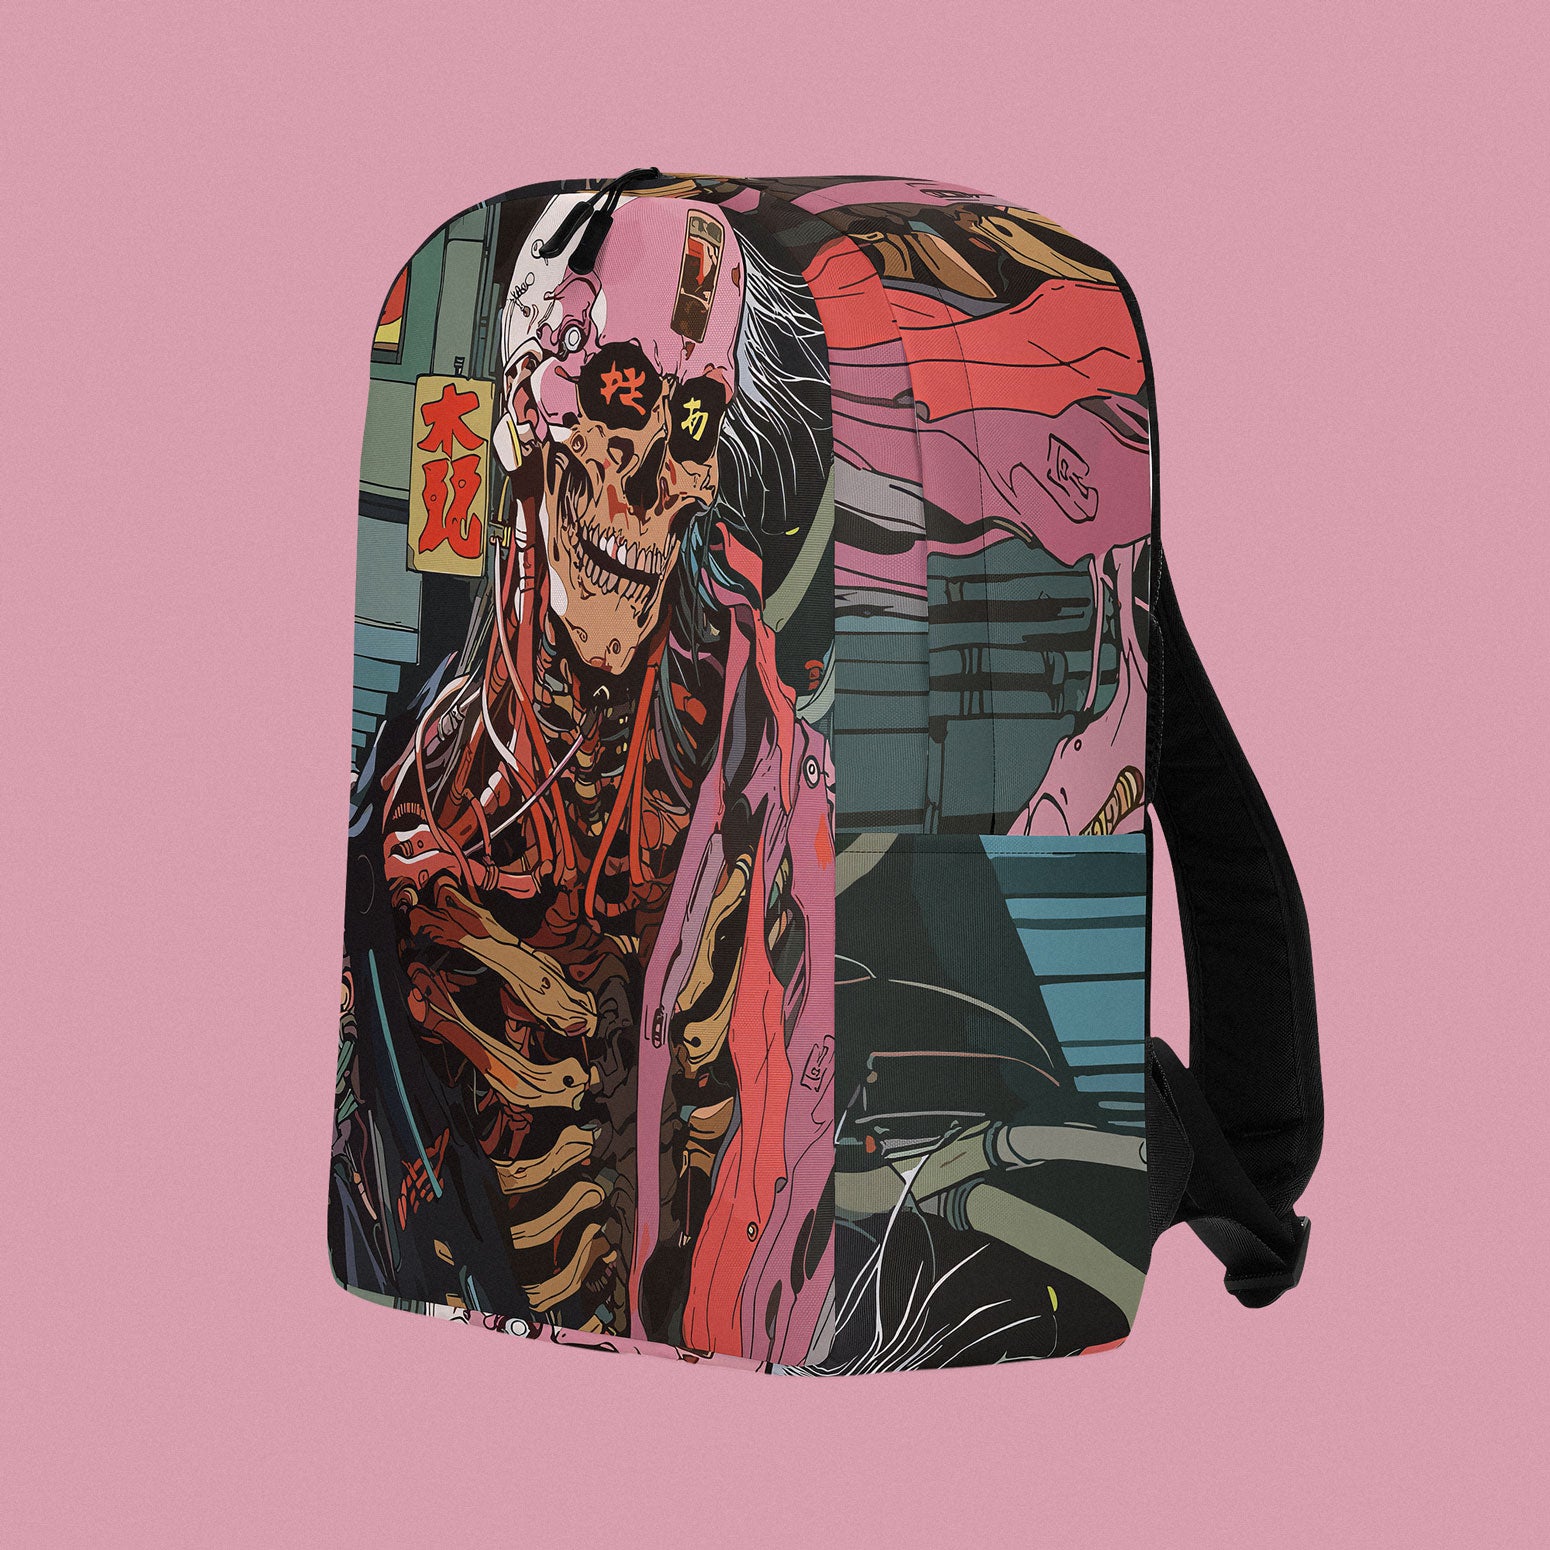 If you often find yourself burdened by the weight of your possessions wherever you go, then this backpack is tailor-made for you. Designed with a roomy main section, complete with a dedicated laptop pocket, and featuring a discreet back pocket for securely stashing your most precious belongings.